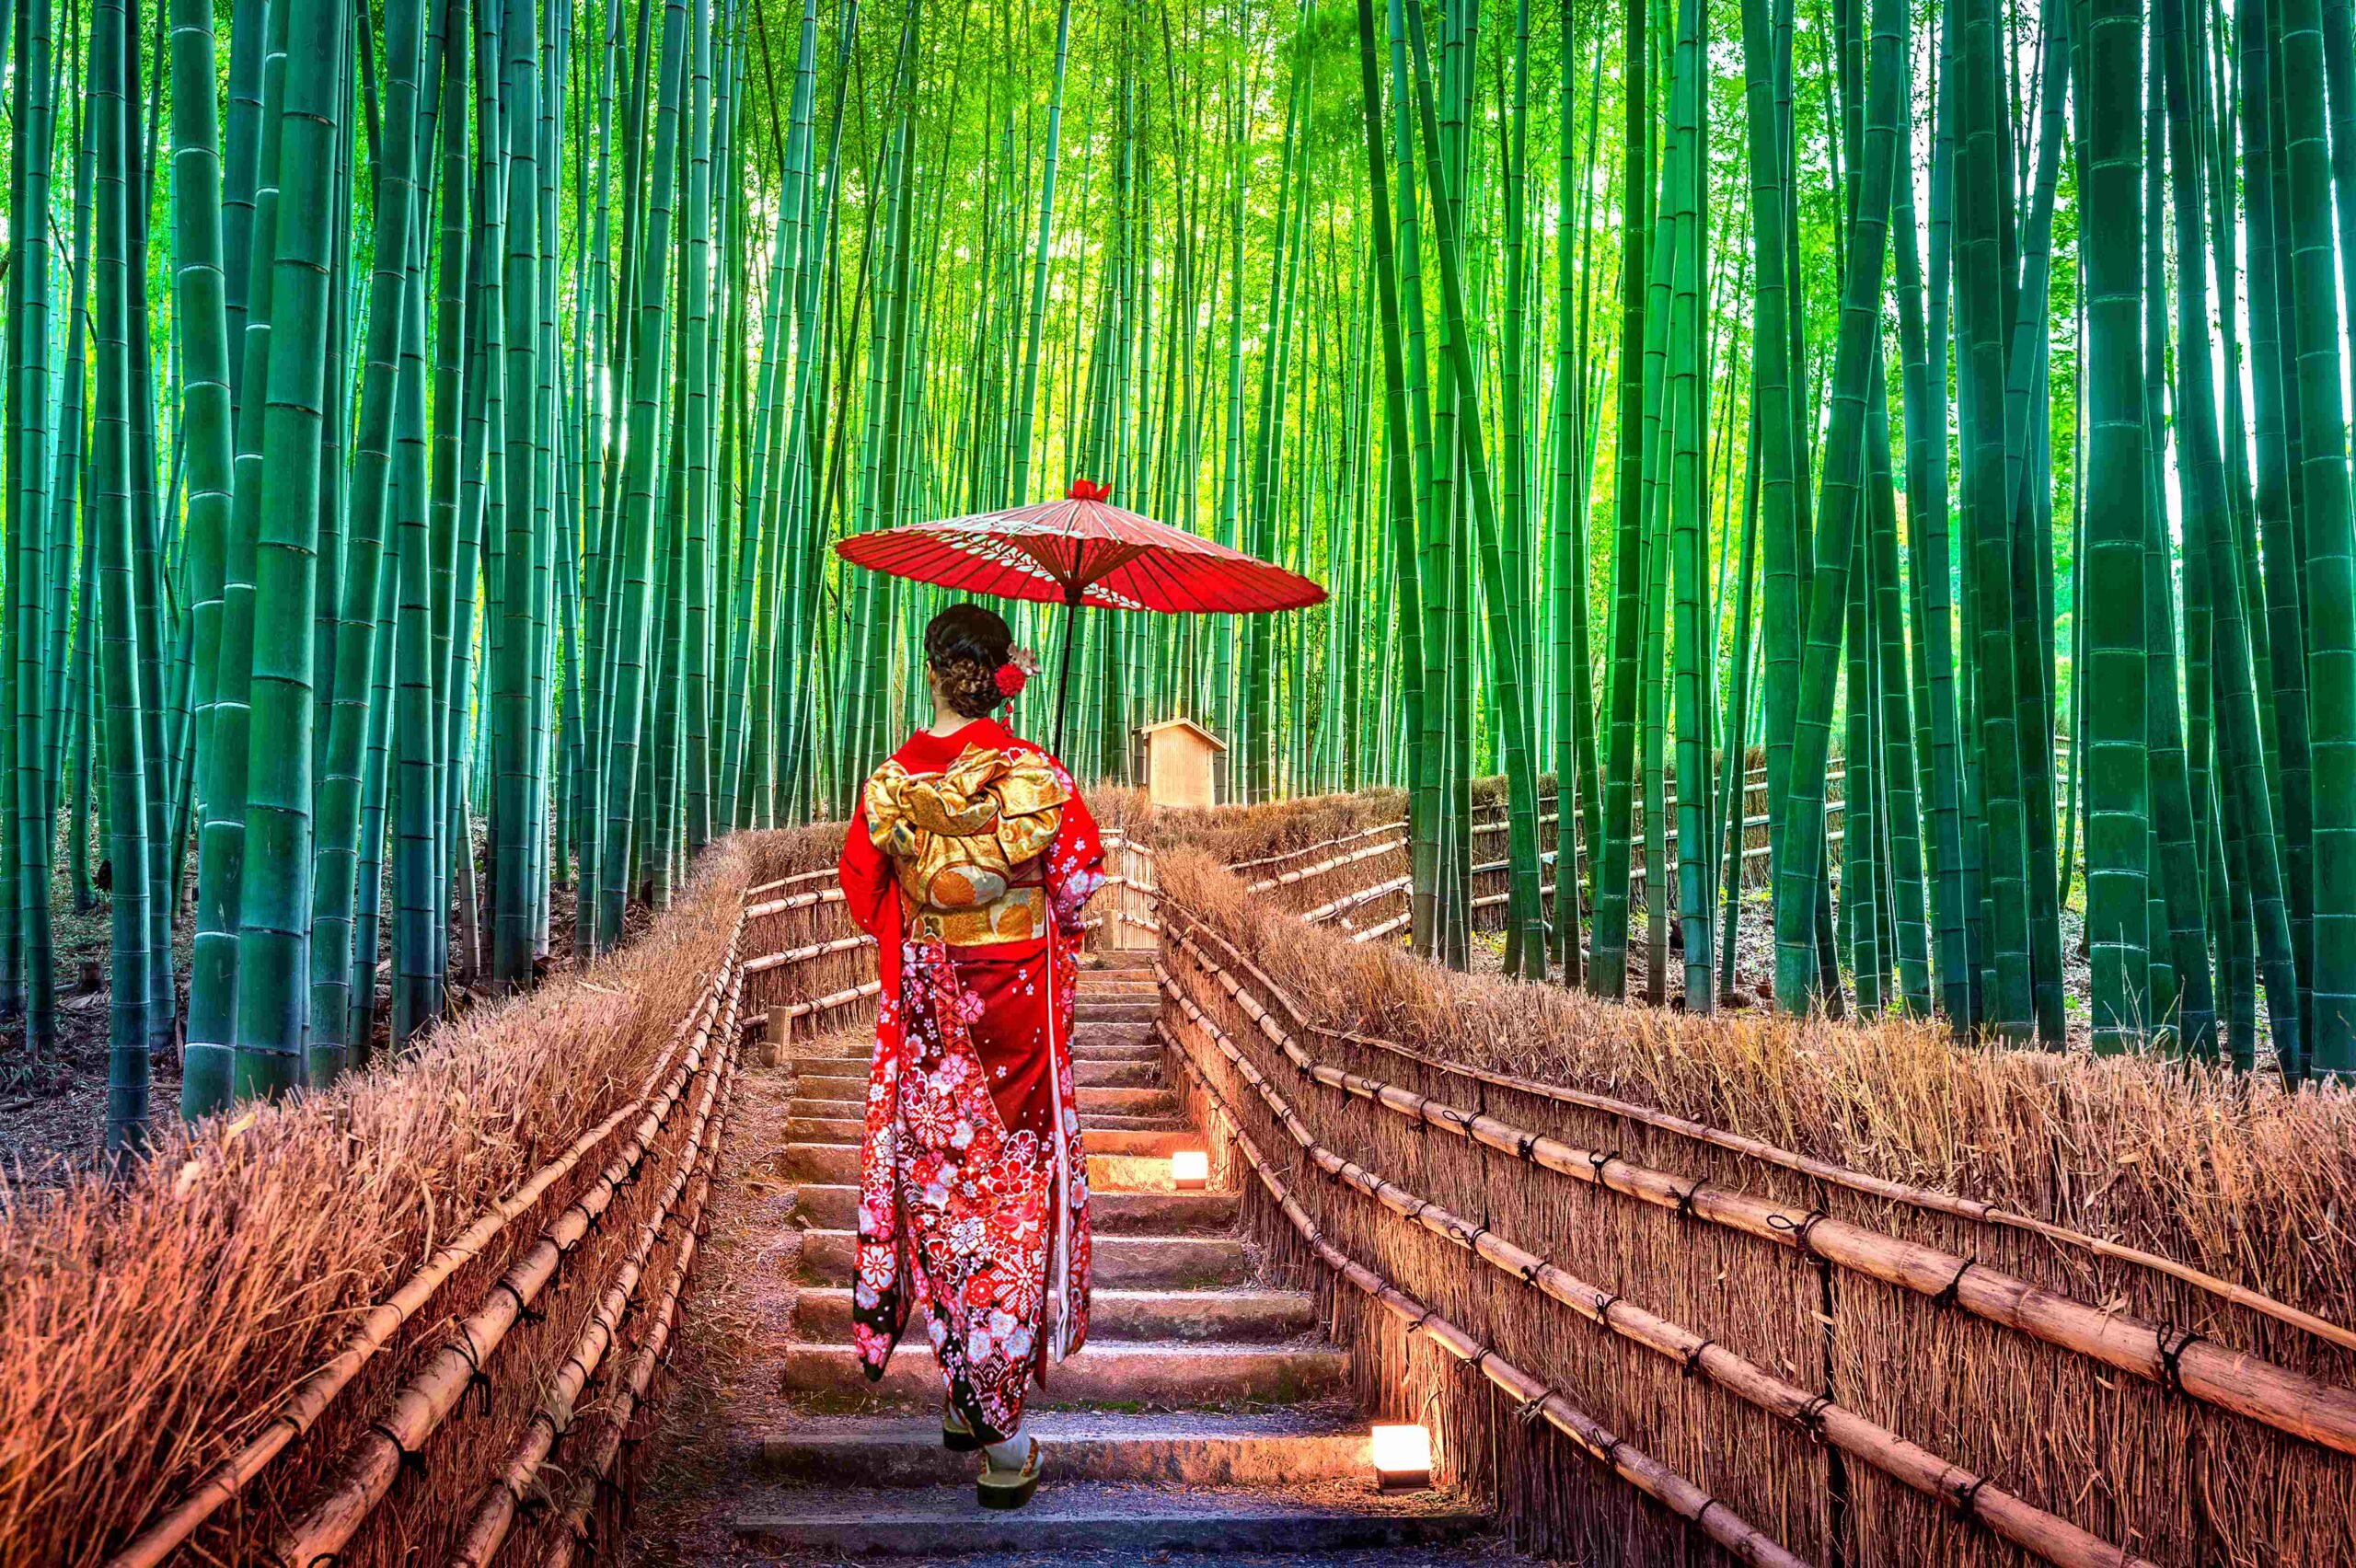 Woman-in-gown-in-Bamboo-forest